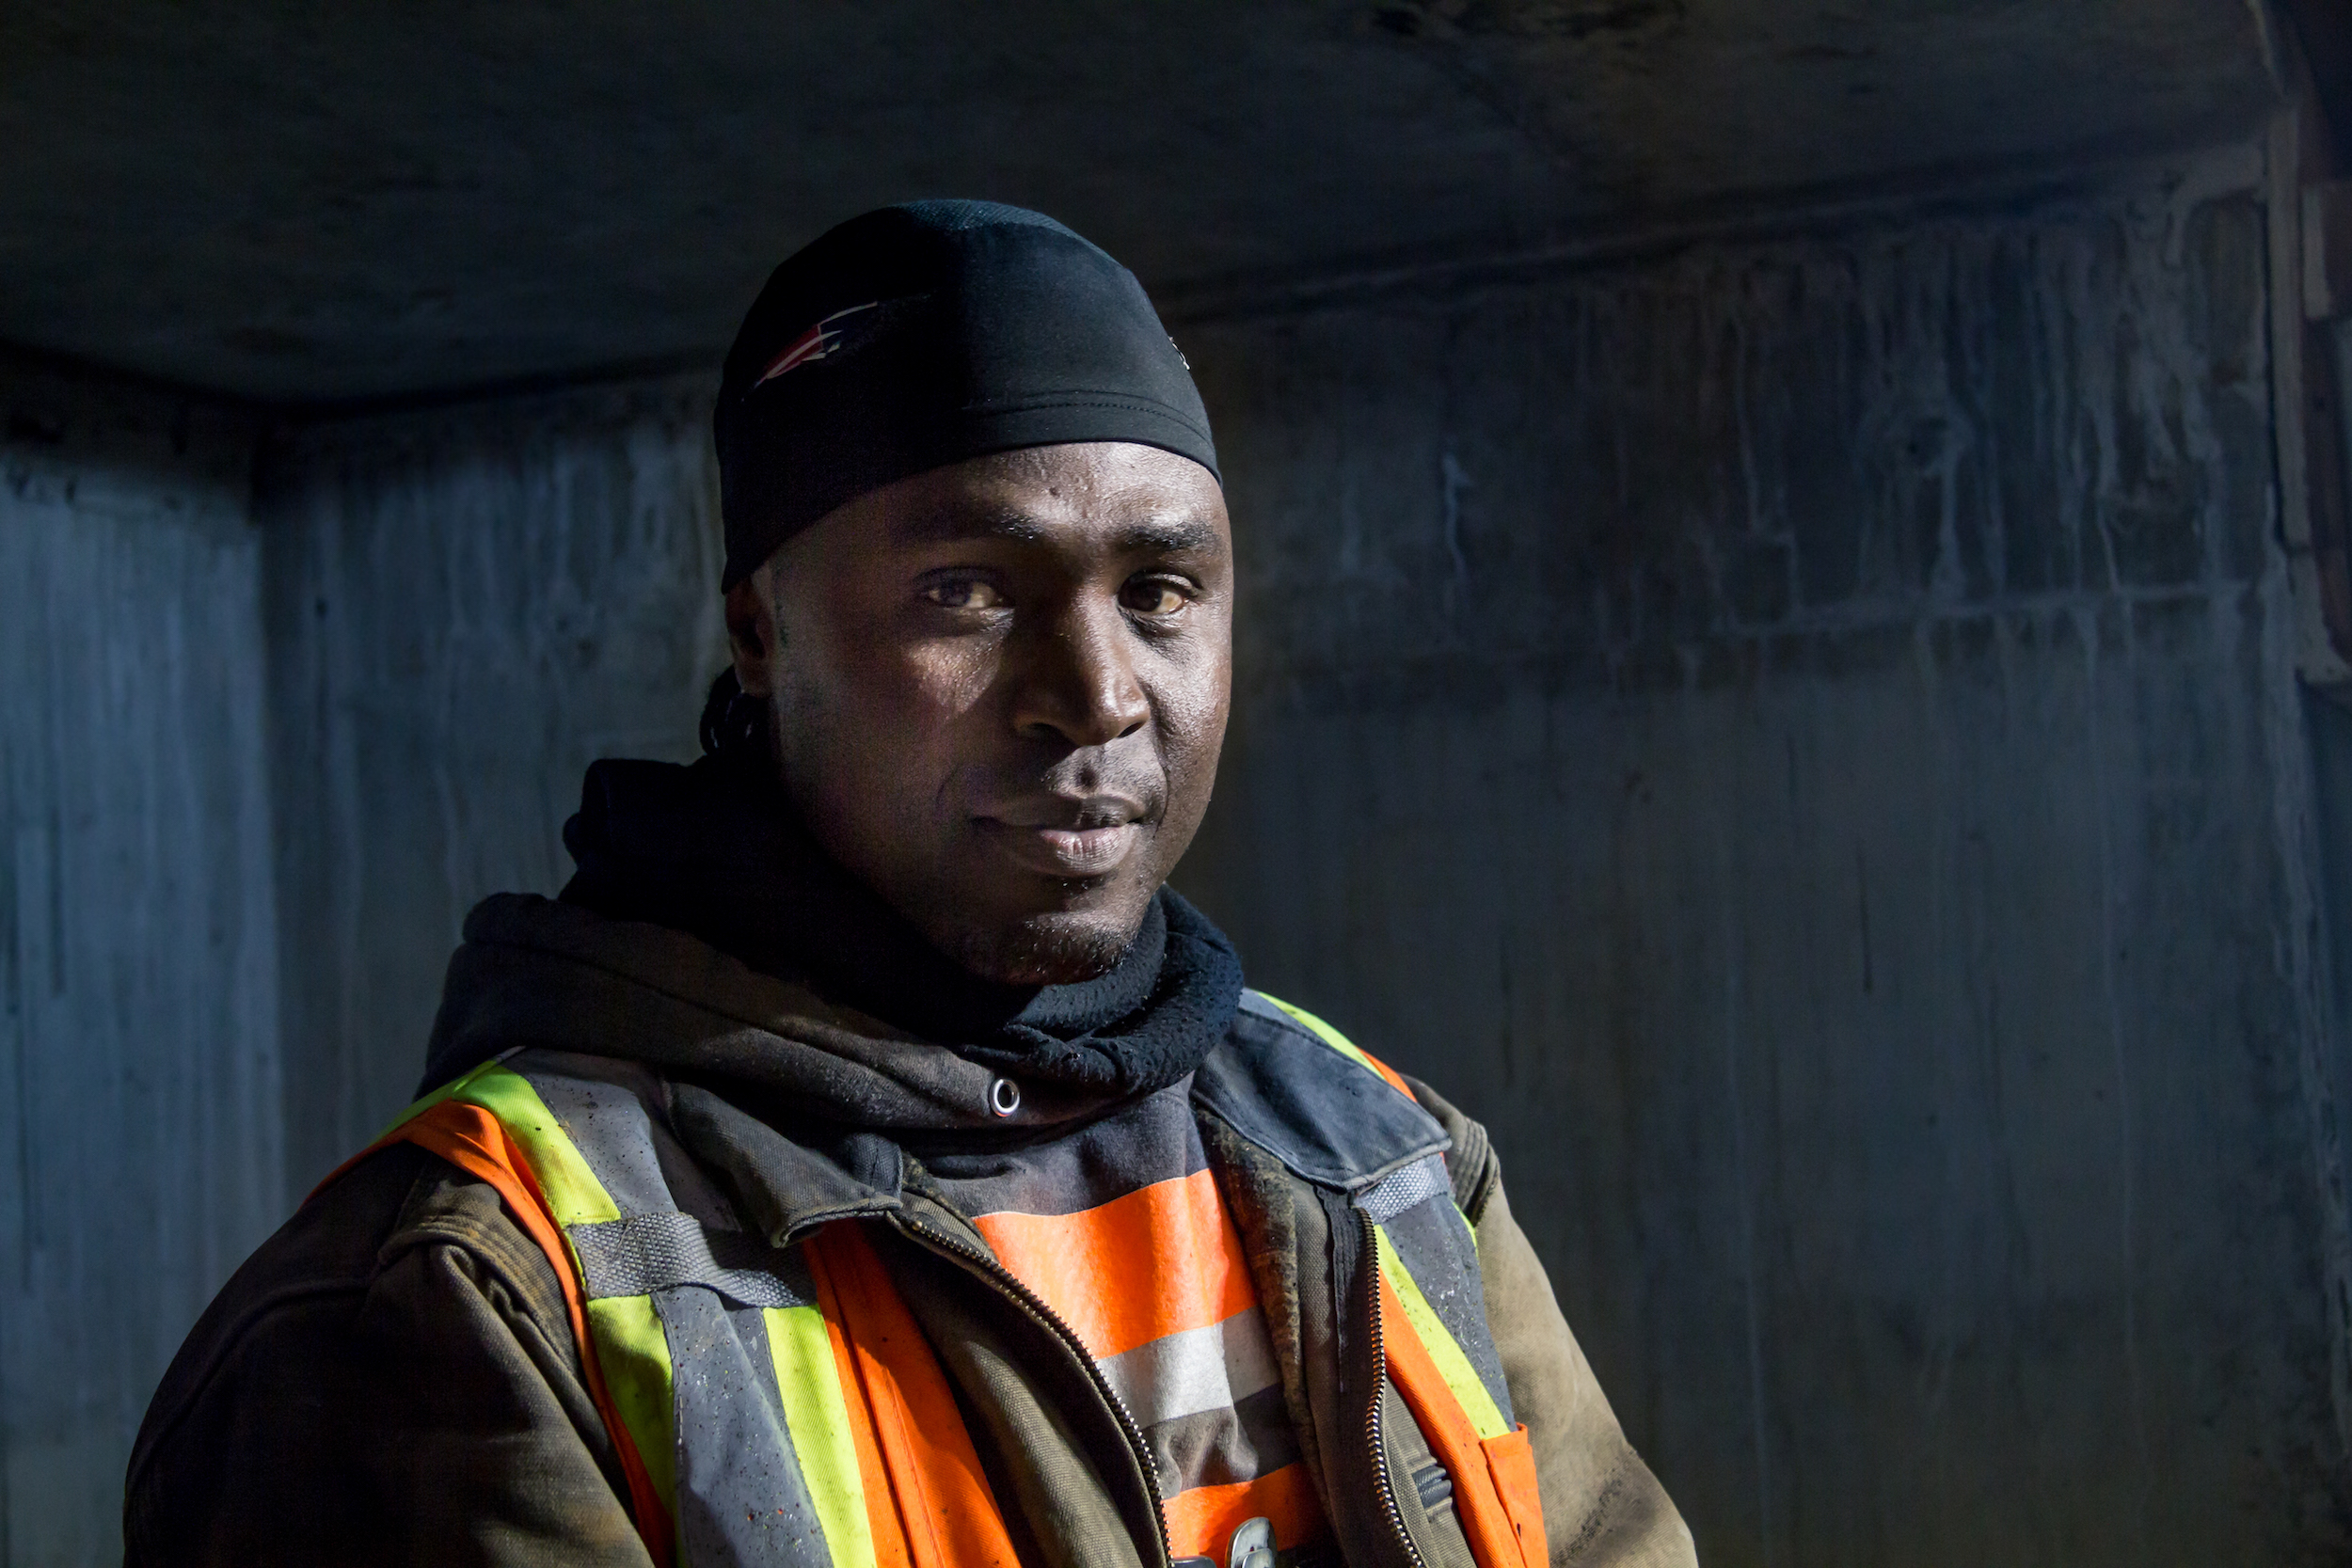 Mohammed Dembele, a construction worker on a large downtown development.